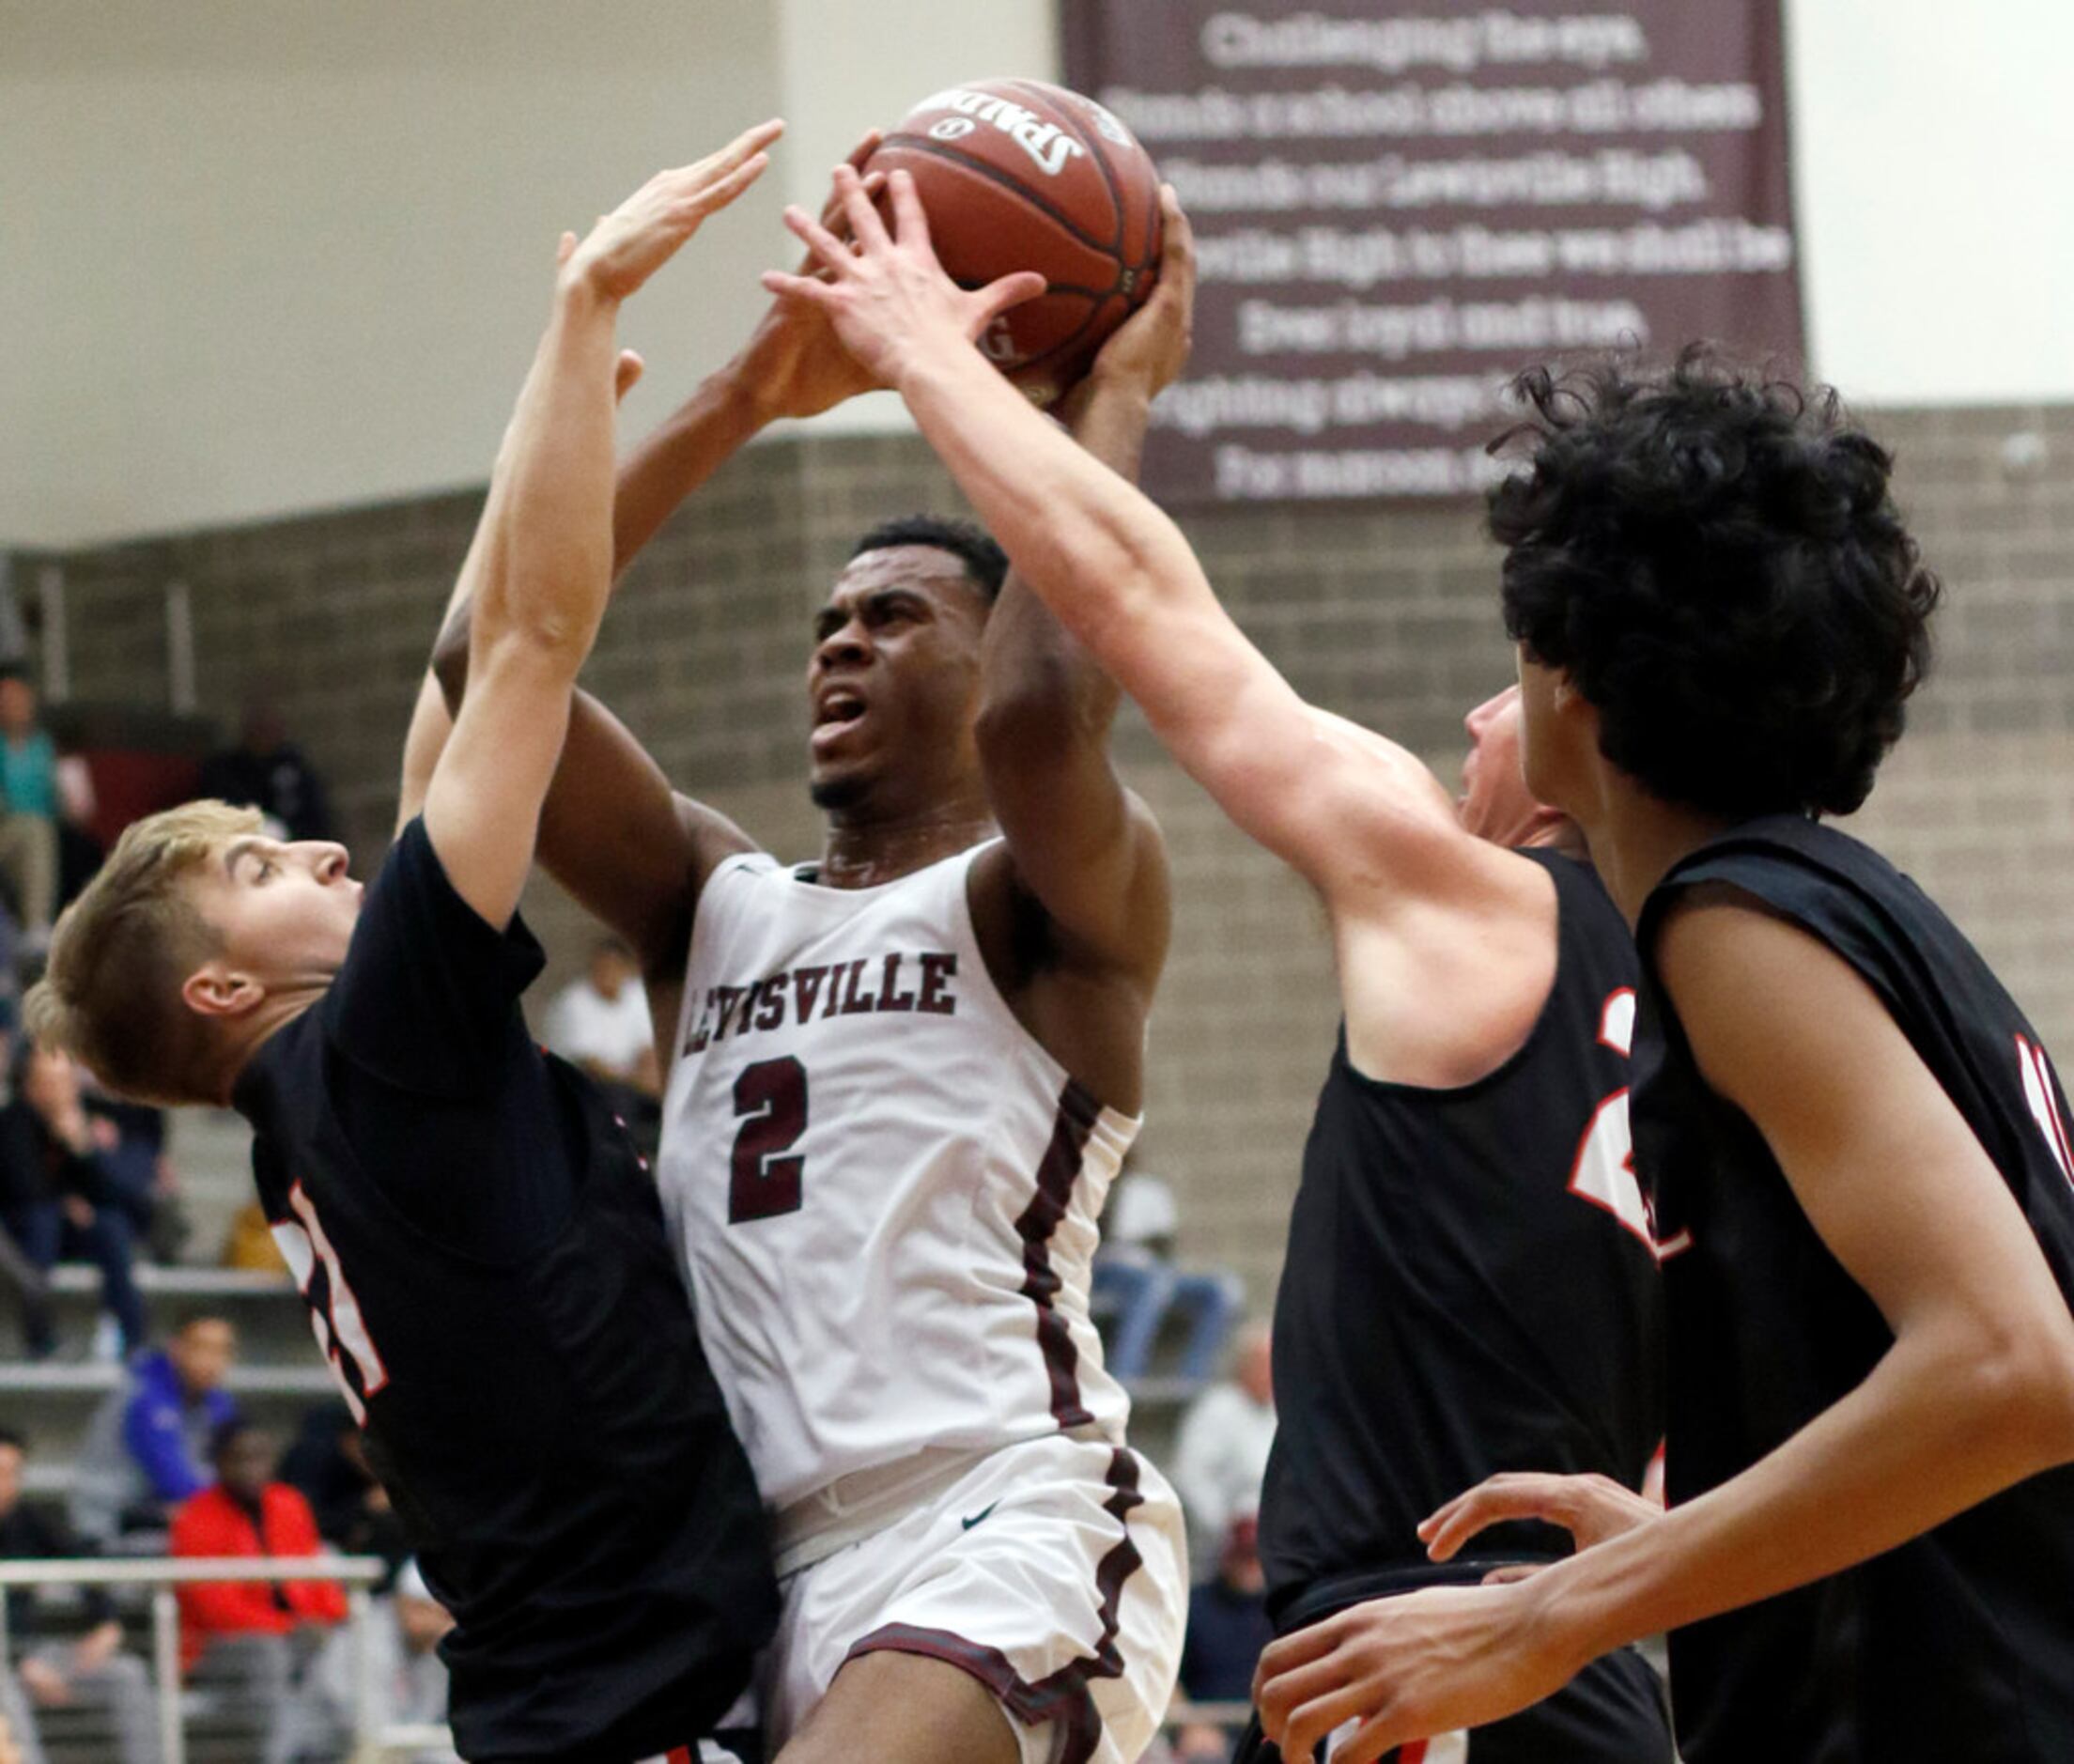 Lewisville's KJ Pruitt (2) puts up a shot against the aggressive defense of Coppell...